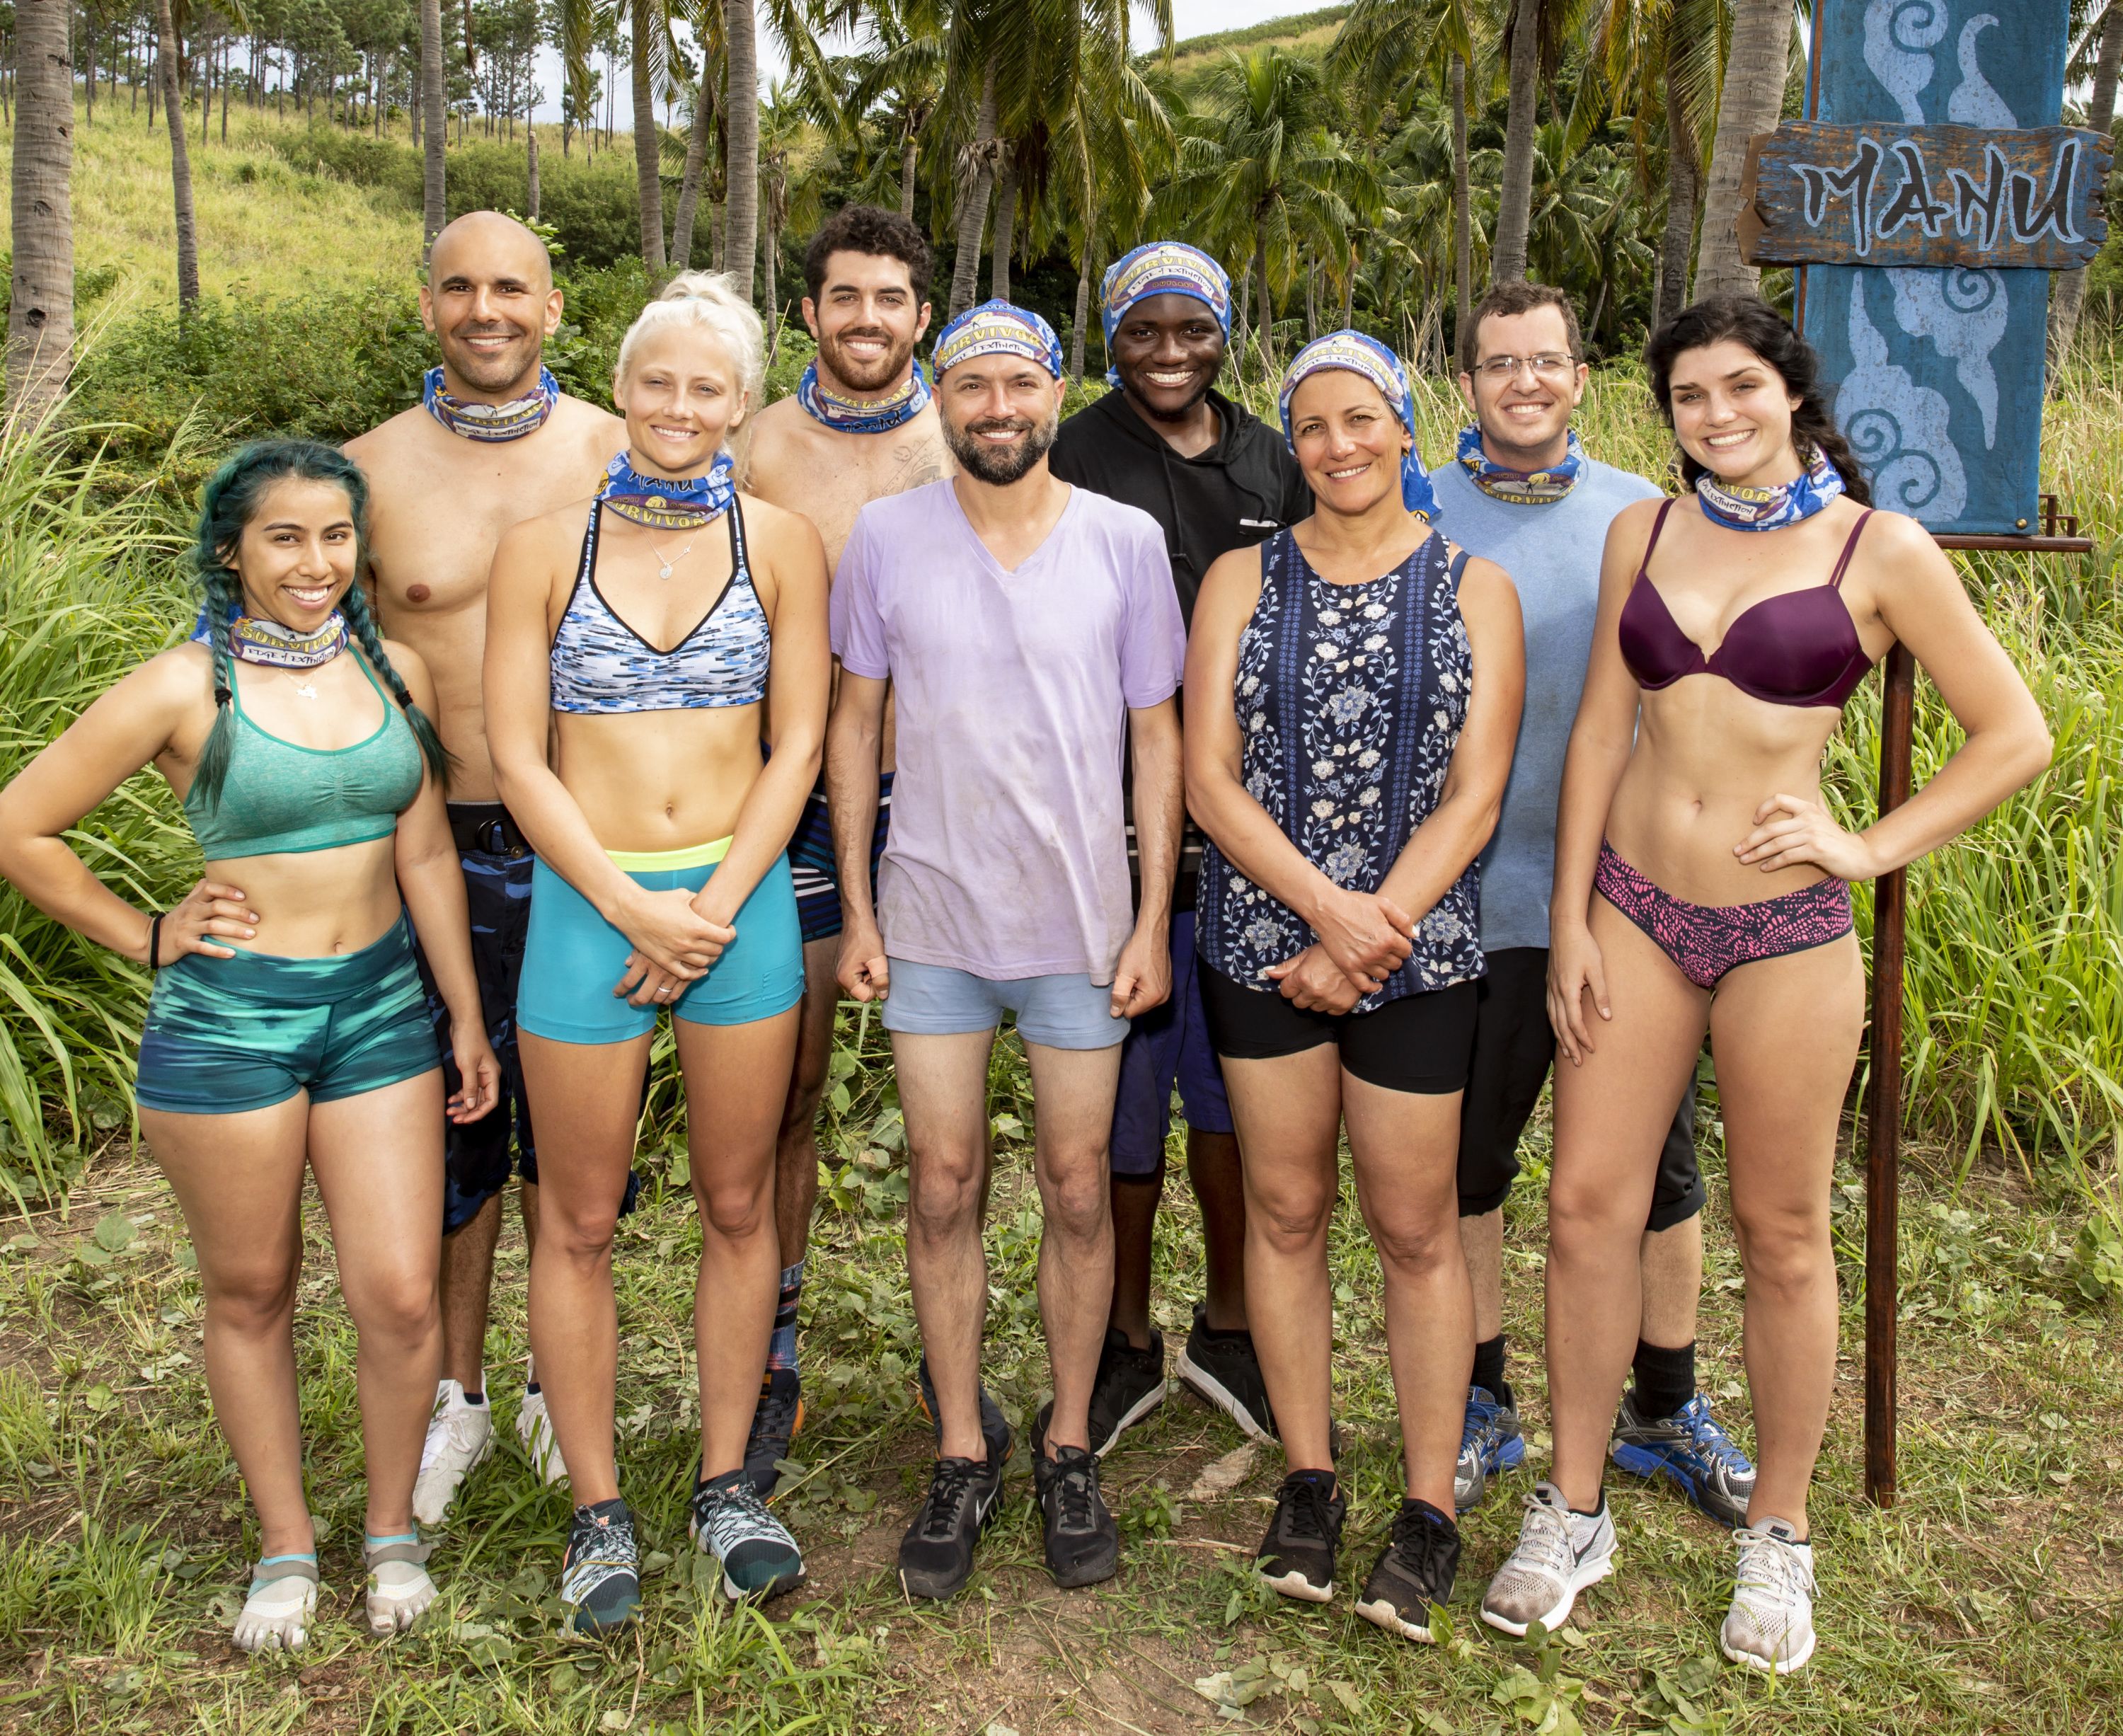 How Long Are Contestants on the Island?